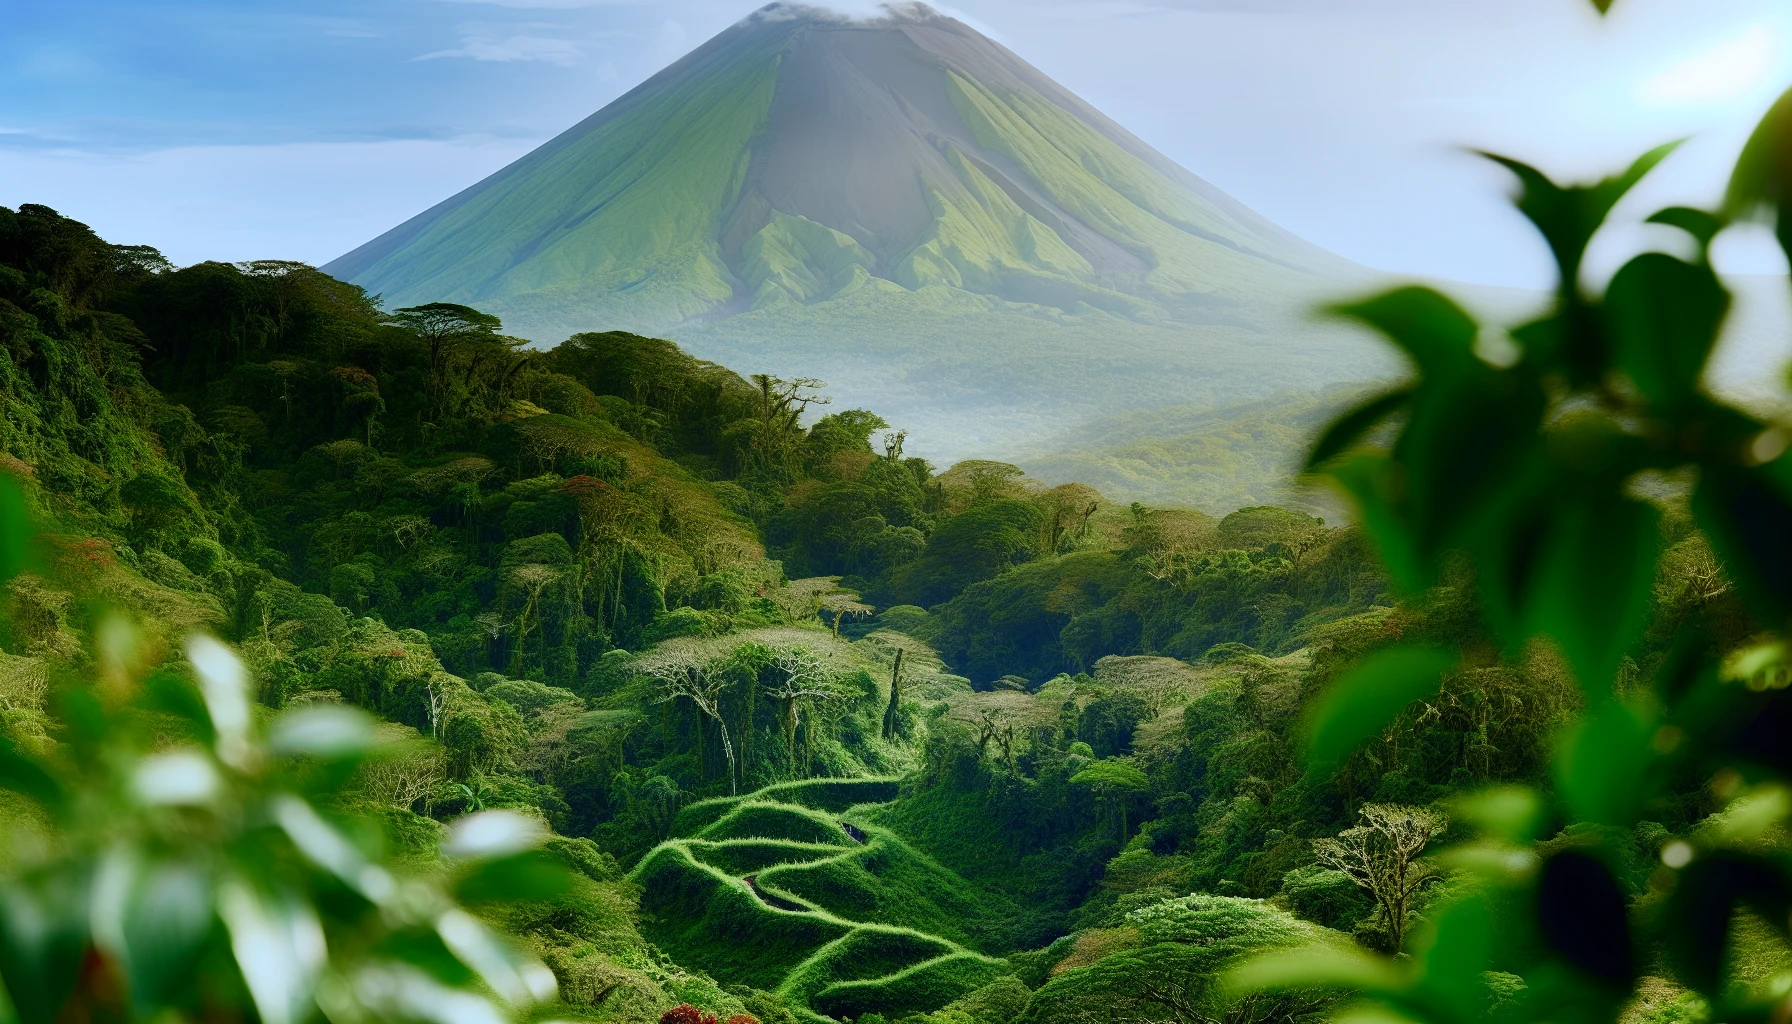 The majestic Arenal Volcano with its surrounding rainforest and hiking trails